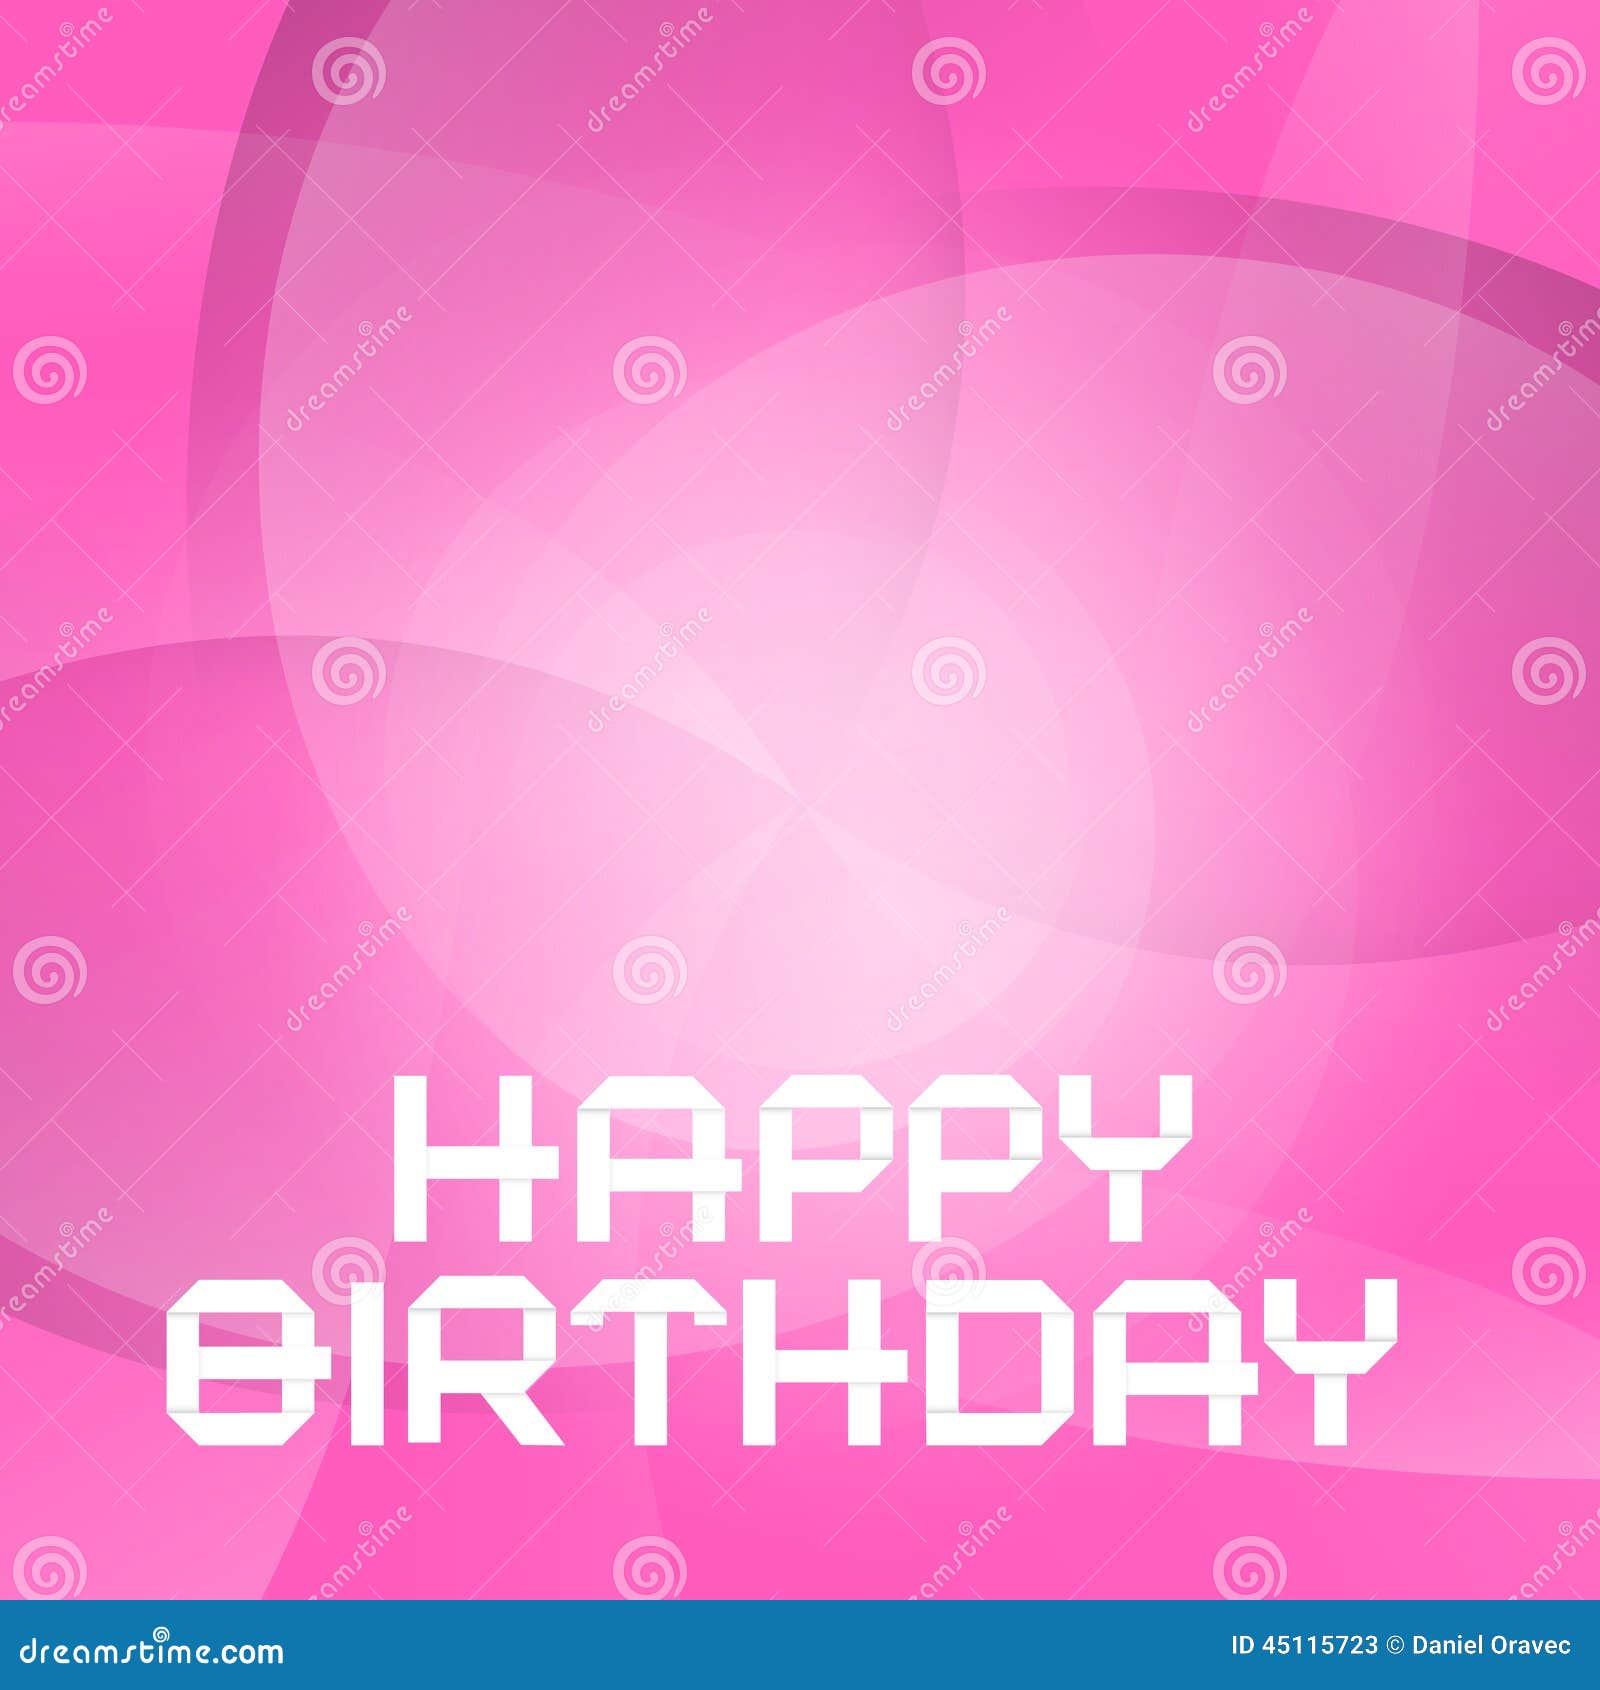 Vector Pink Happy Birthday Card Stock Vector - Illustration of poster ...